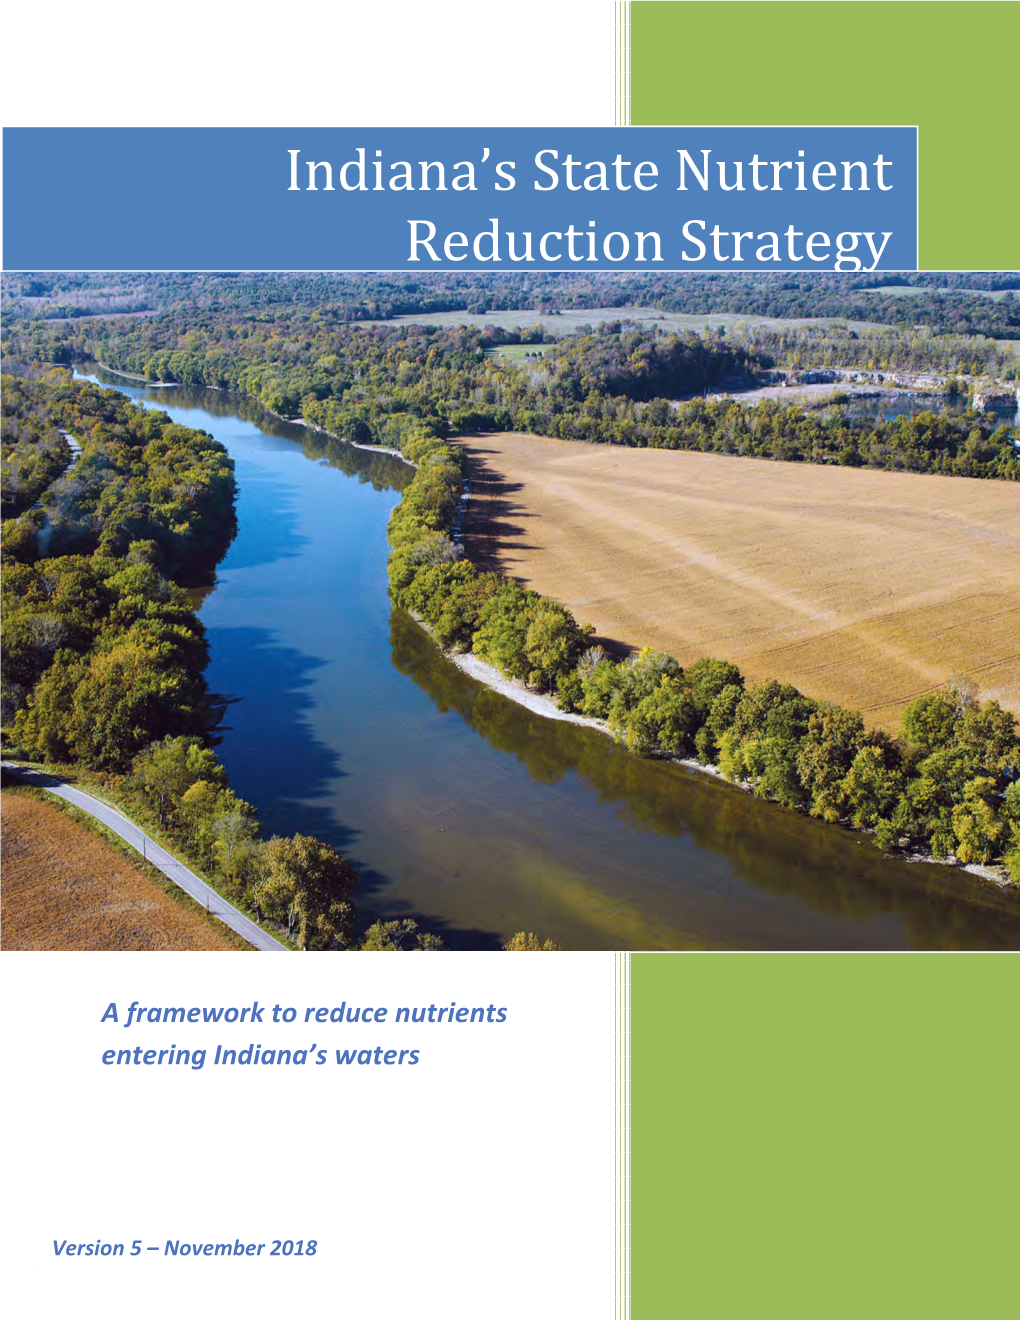 Indiana's State Nutrient Reduction Strategy